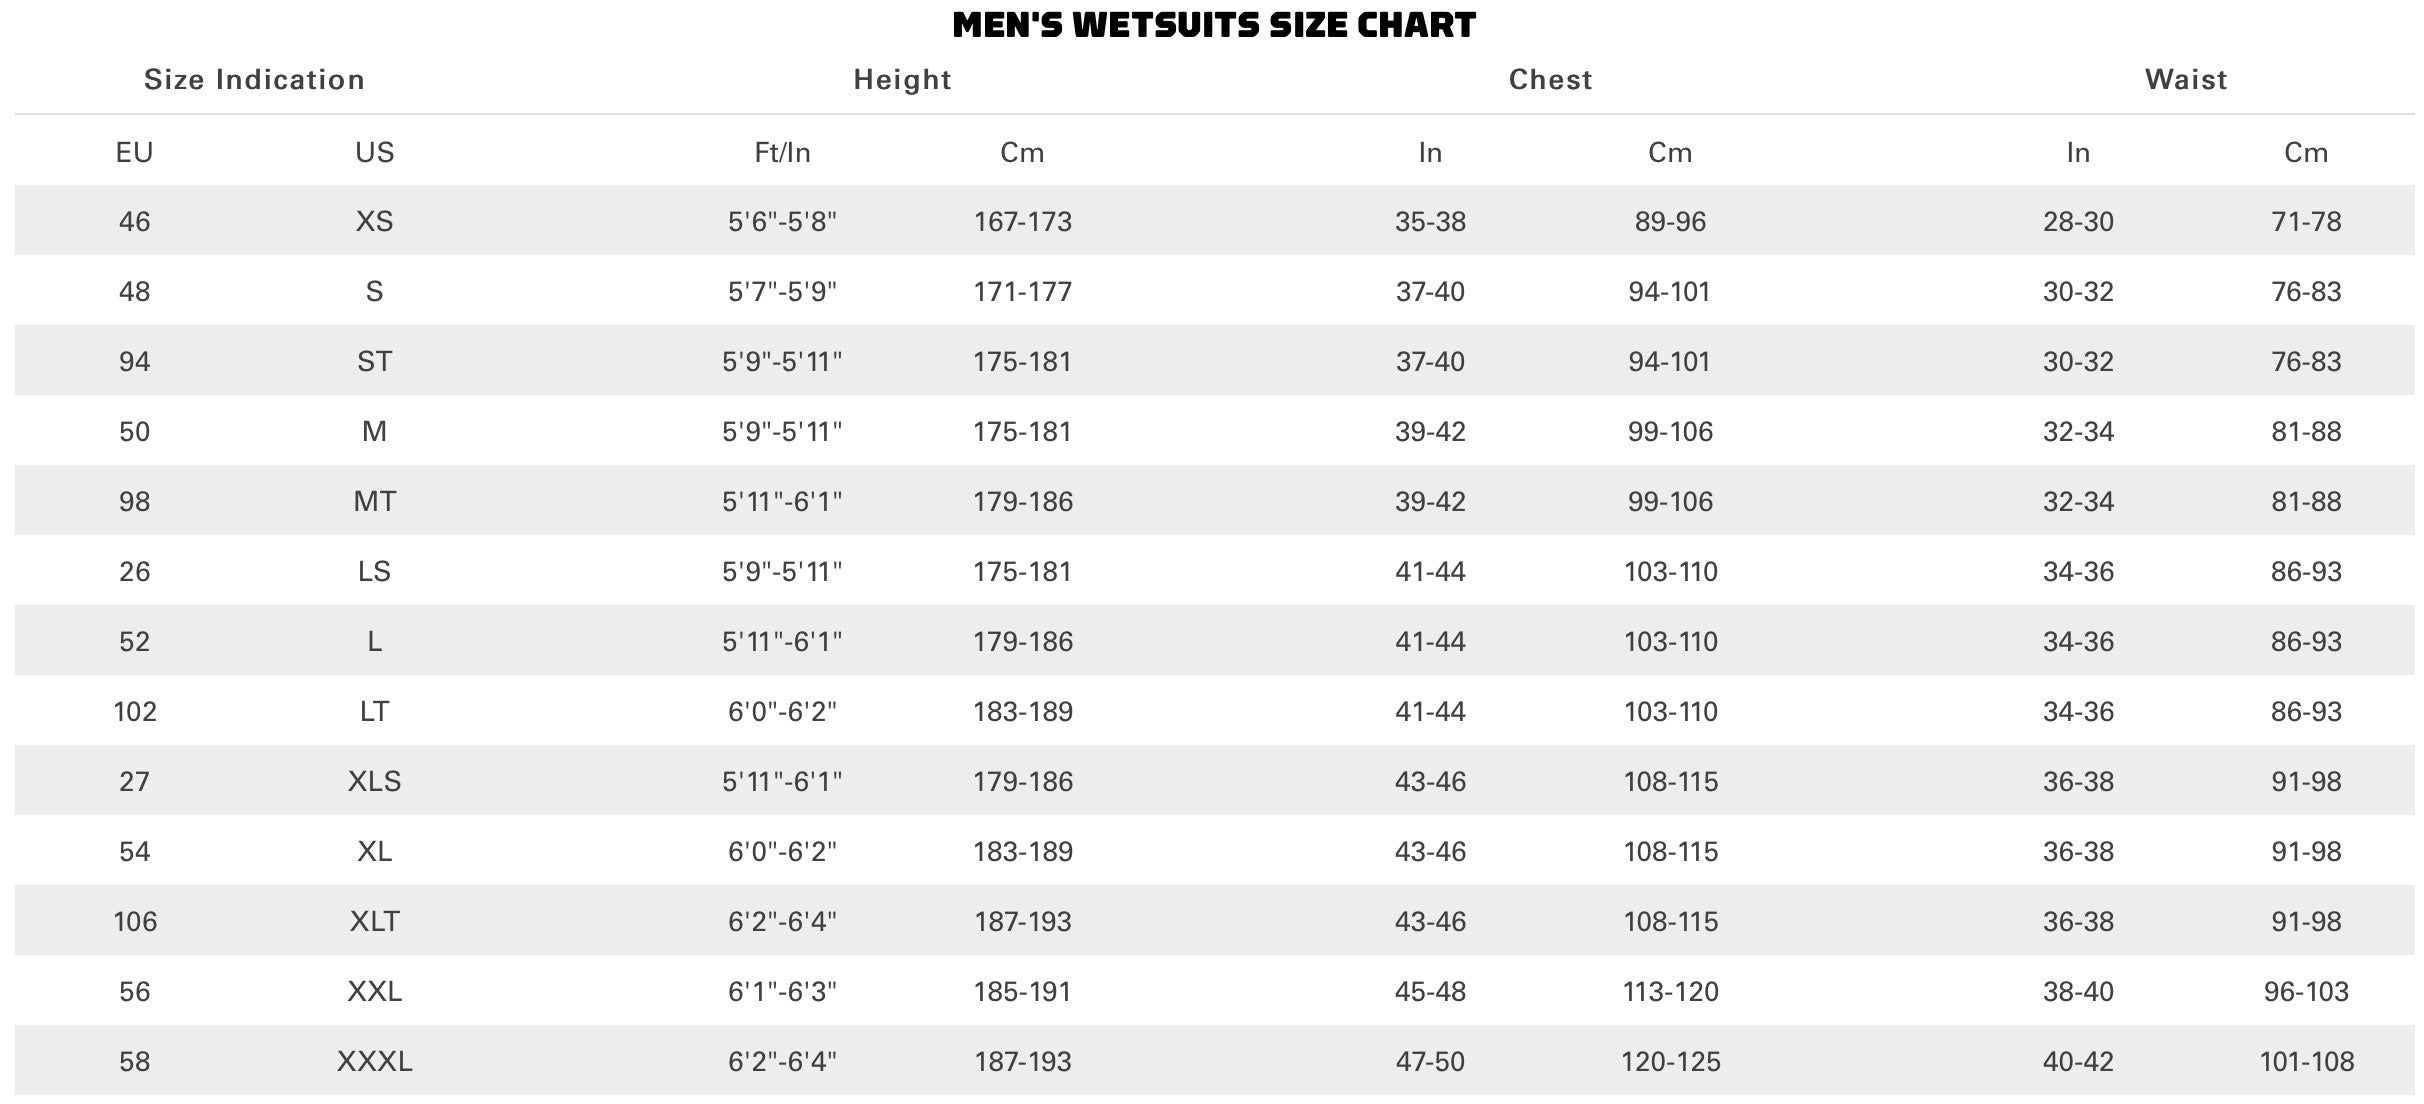 Neilpryde Wetsuit Size Guide 2019